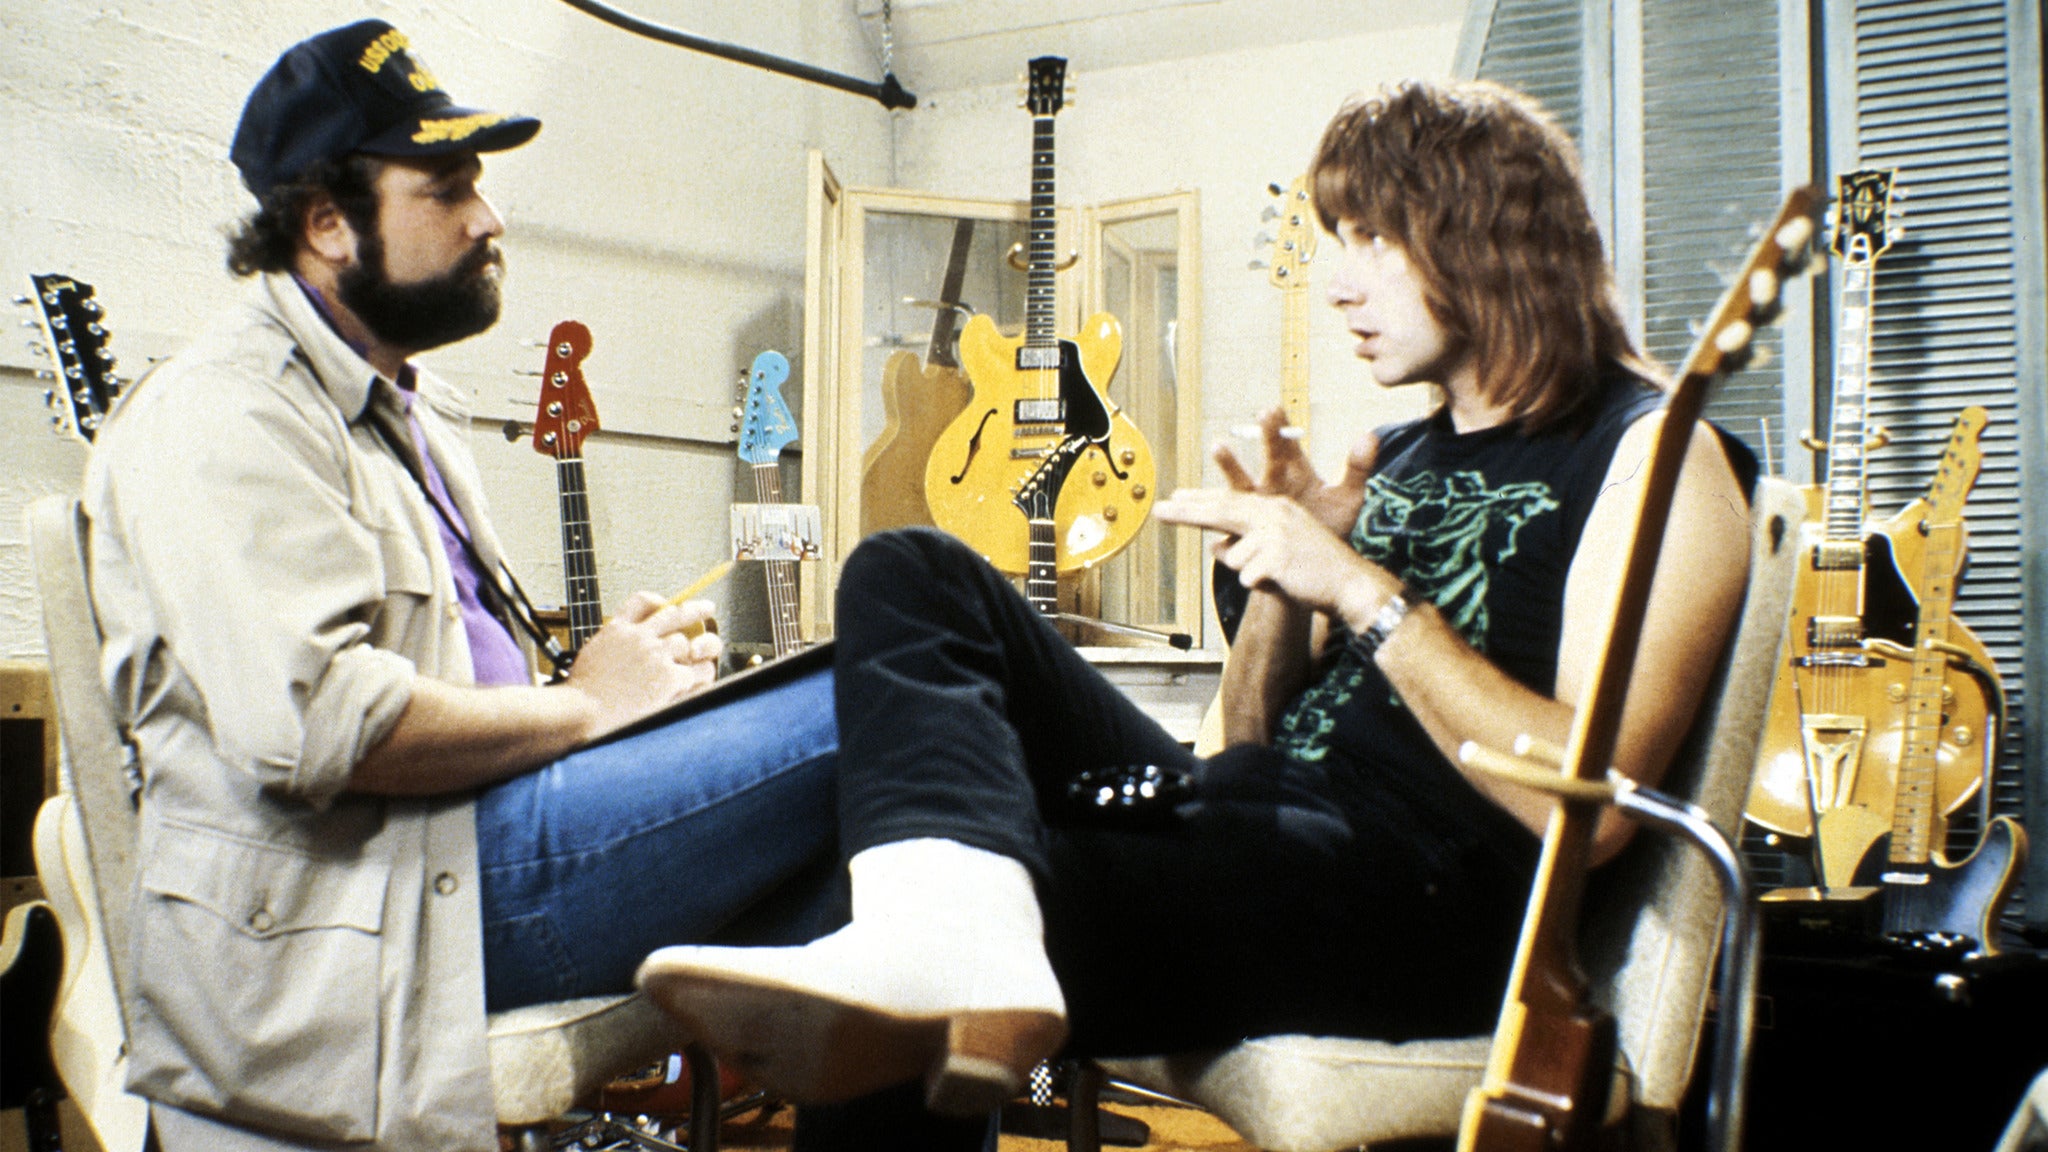 Rob Reiner Live & This is Spinal Tap in Newark promo photo for Donor / Member presale offer code